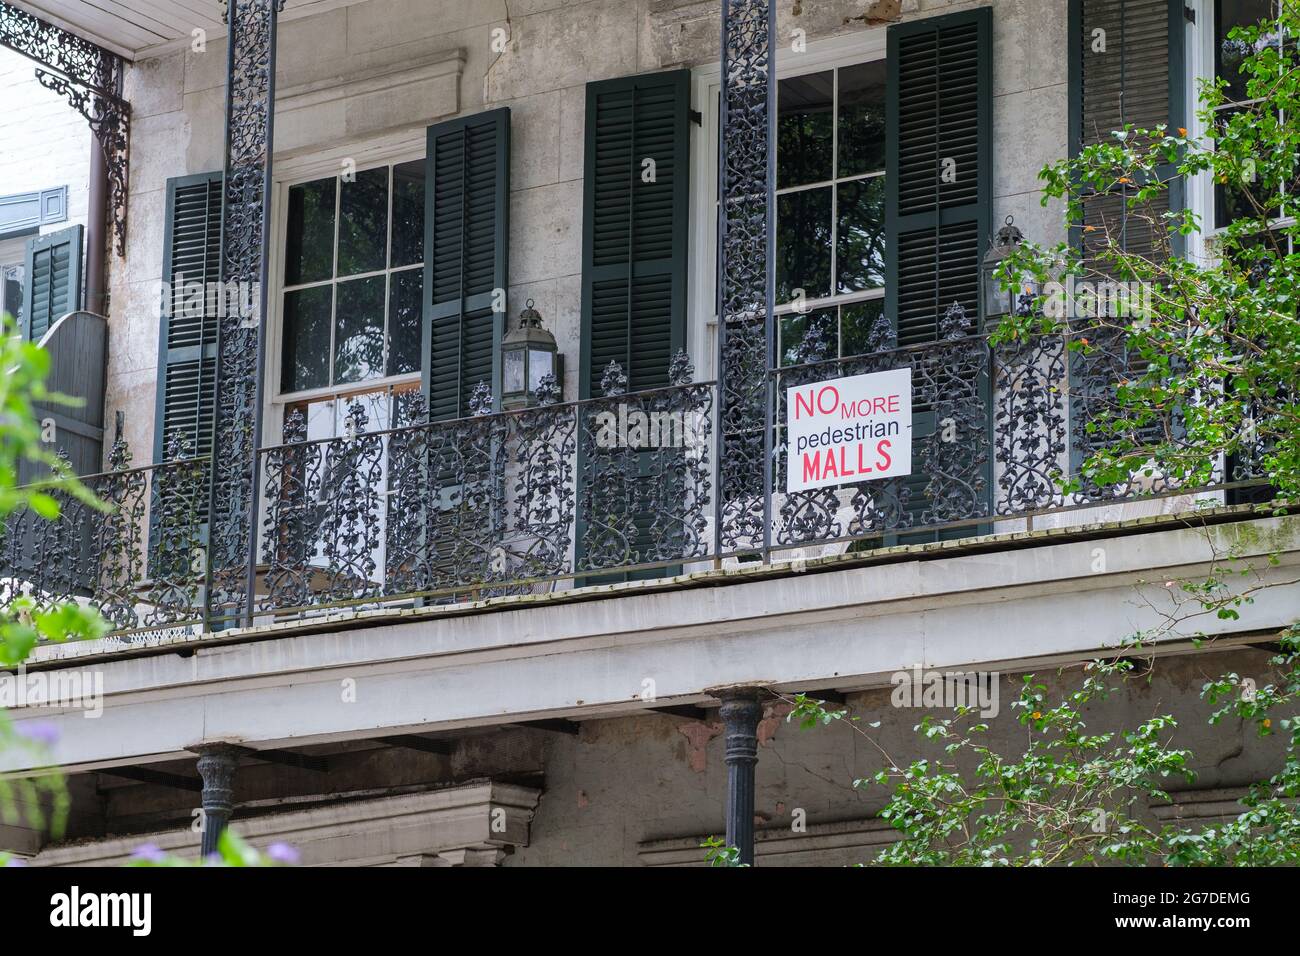 NEW ORLEANS, LA, USA - JULY 10, 2021: 'No More Pedestrian Malls' sign on gallery of historic French Quarter building Stock Photo